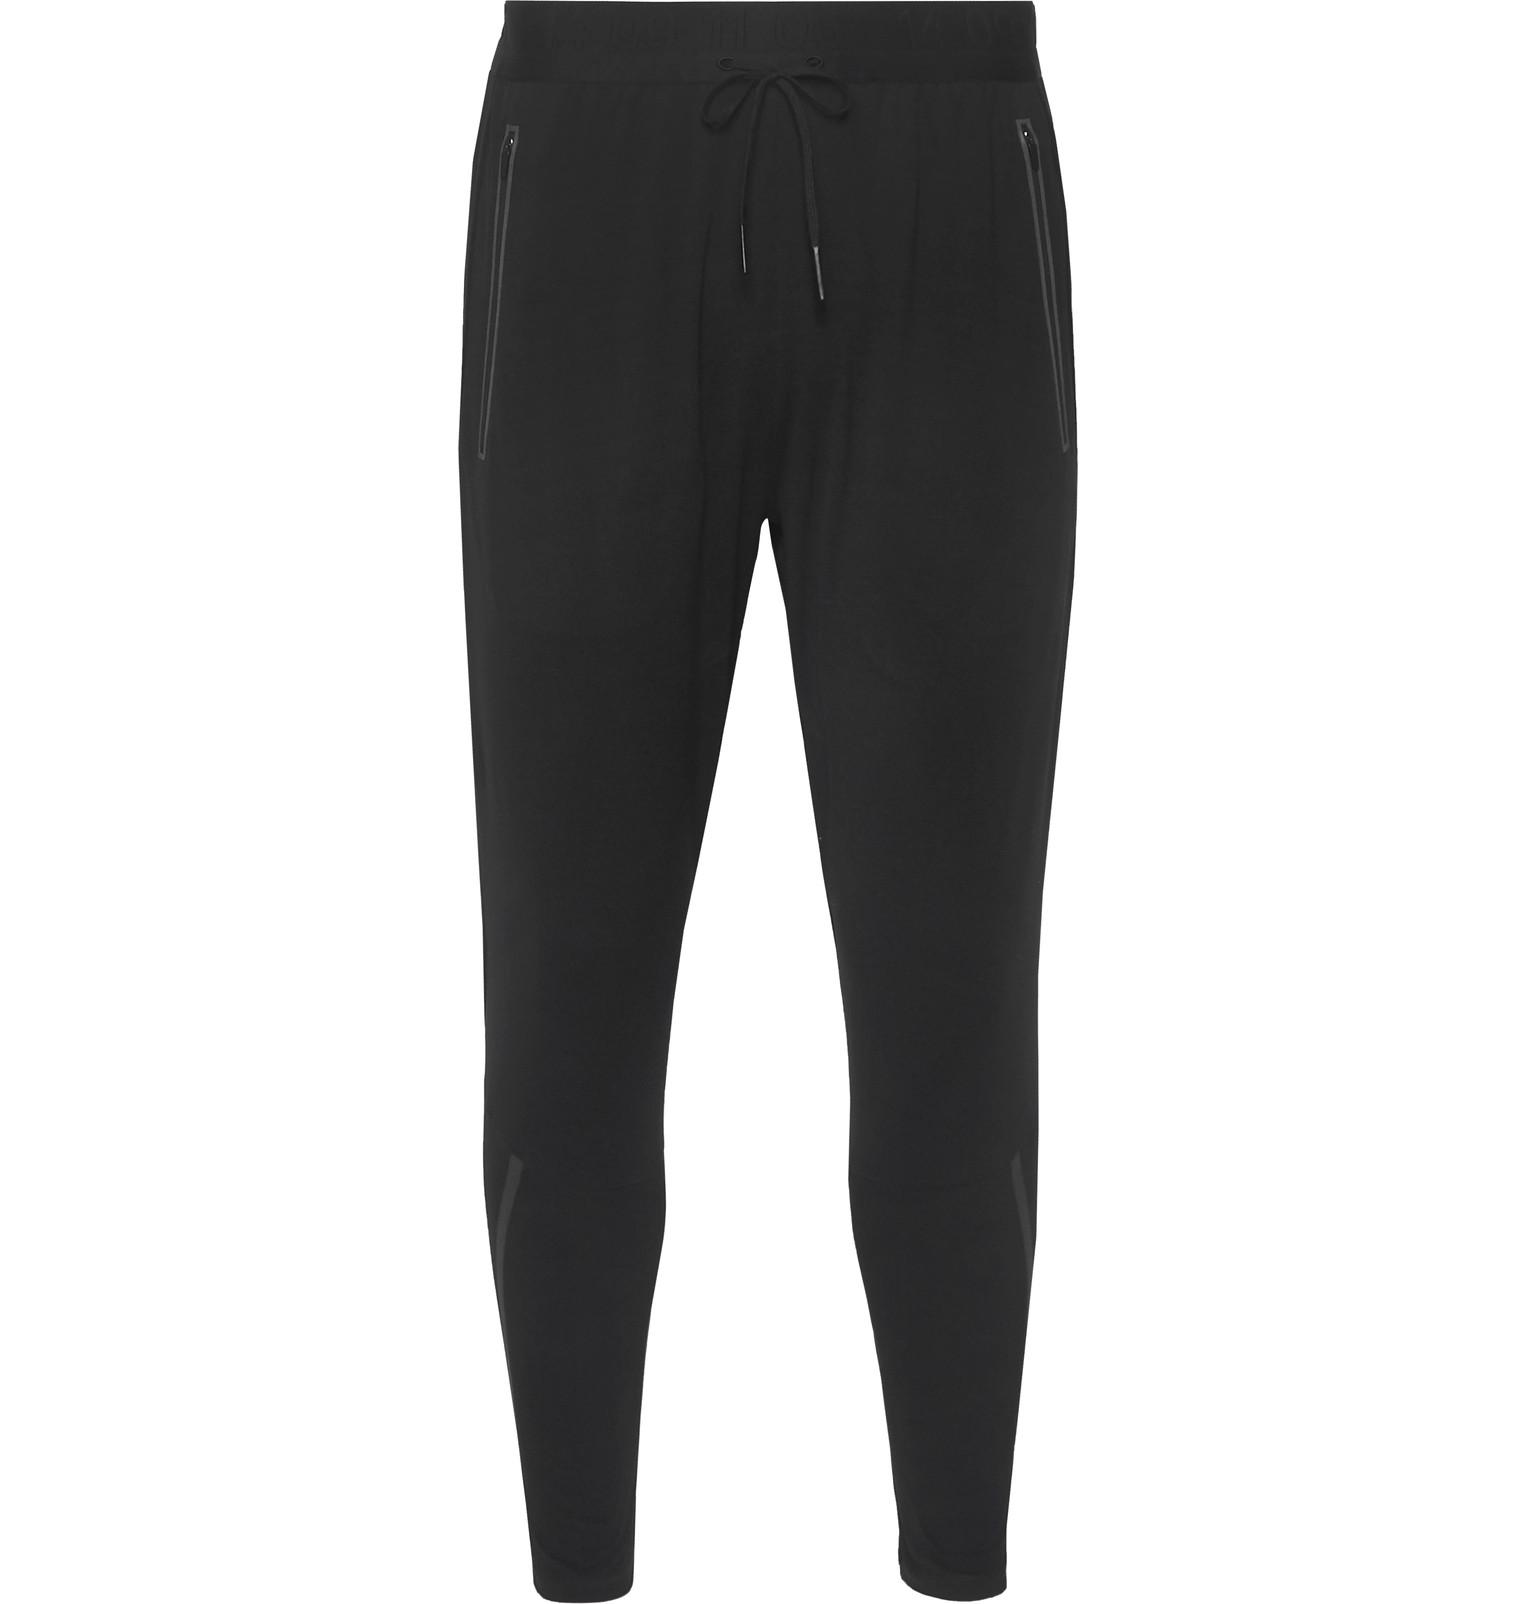 Lyst - Nike Tapered Therma-sphere Sweatpants in Black for Men